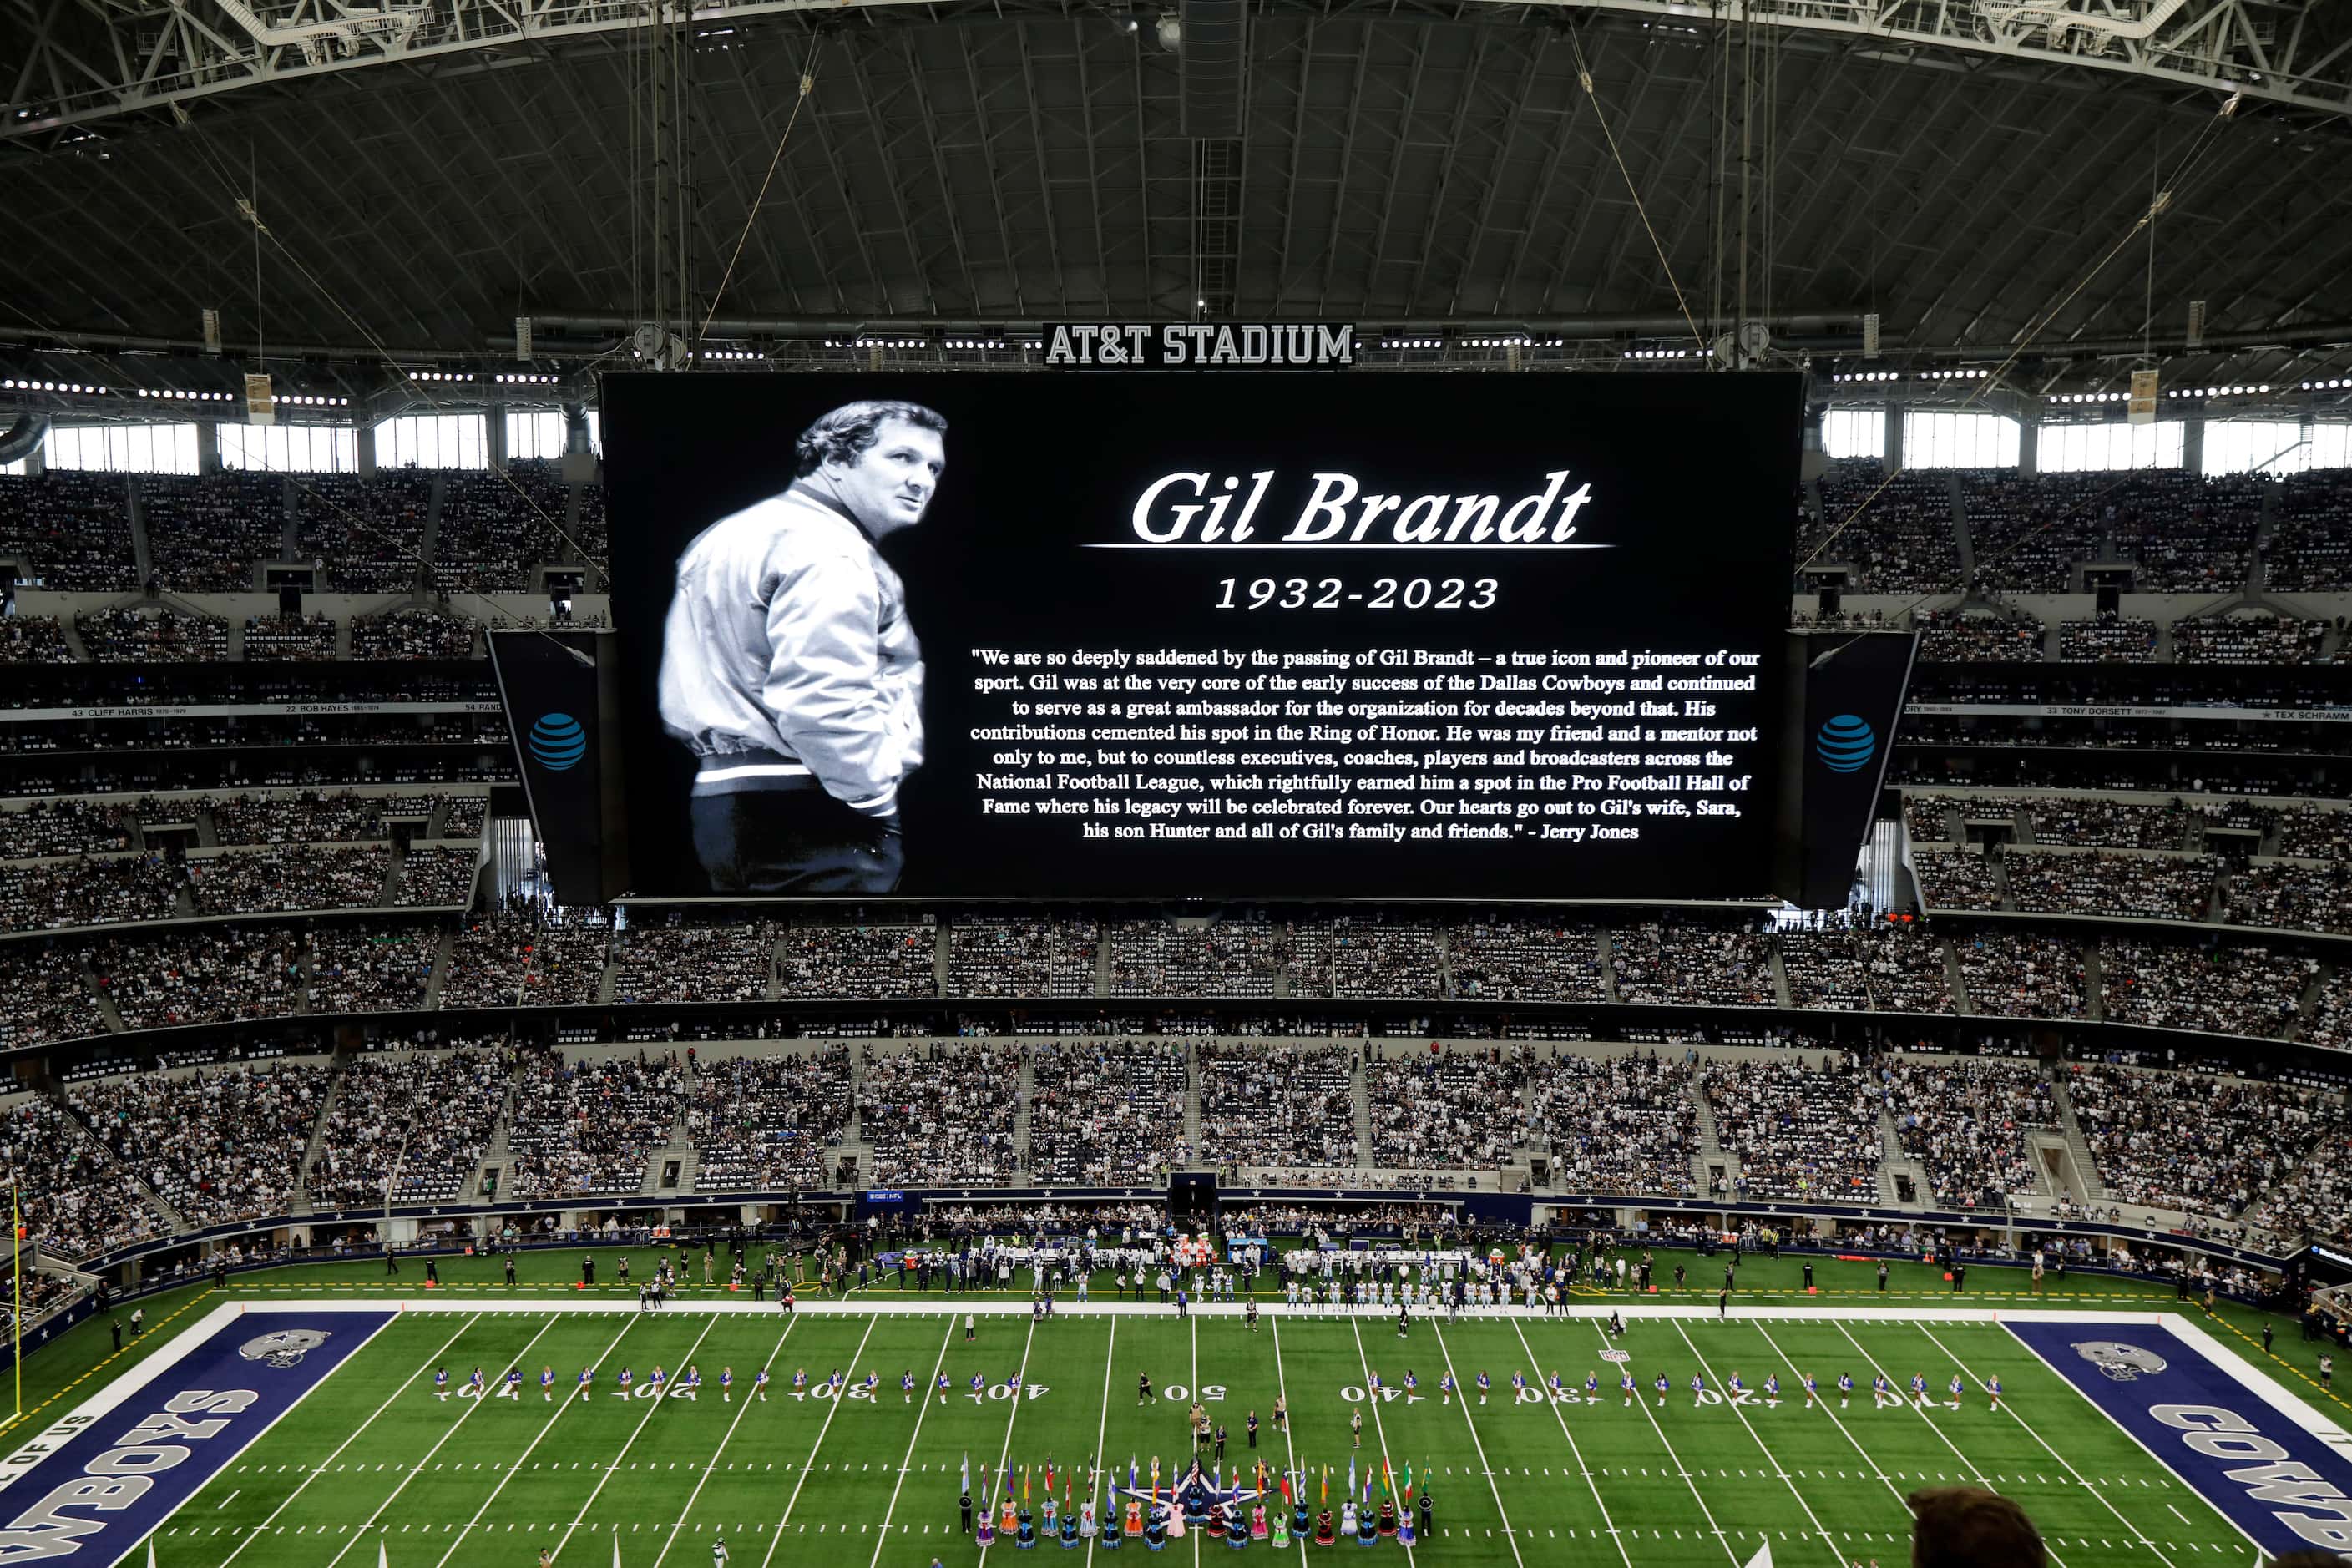 Pro Football Hall of Famer and Dallas Cowboys executive Gil Brandt was remembered before the...